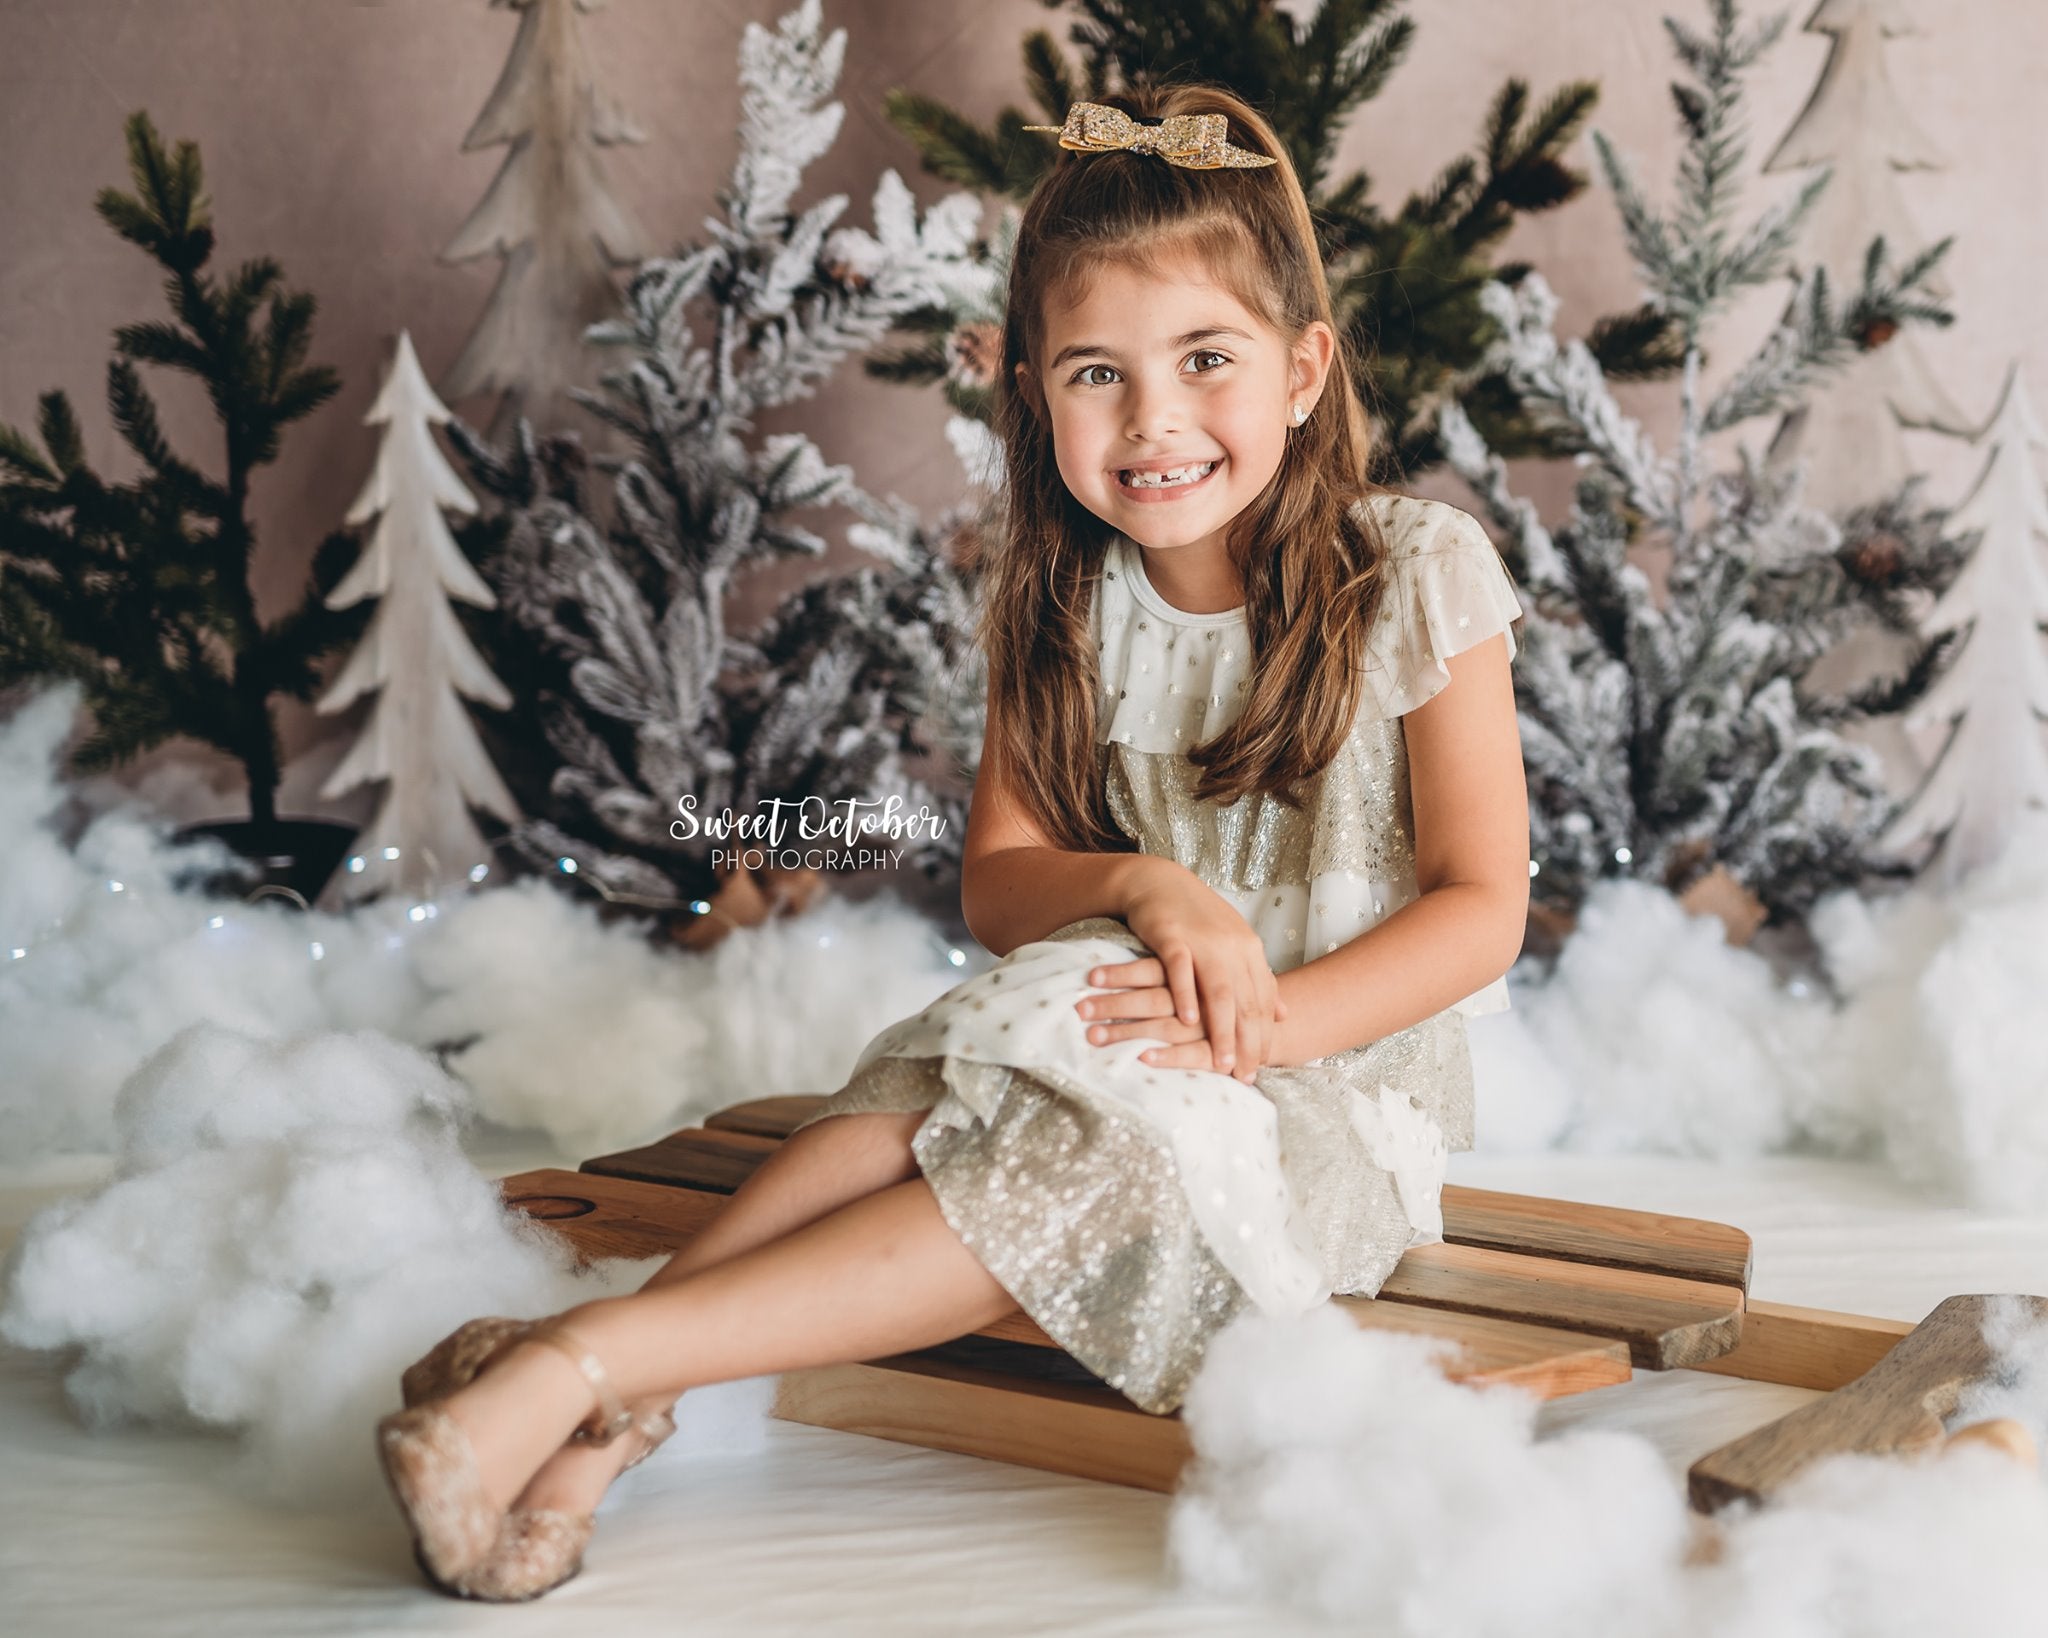 Kate Simple Christmas Trees Backdrop Designed By Mandy Ringe Photography